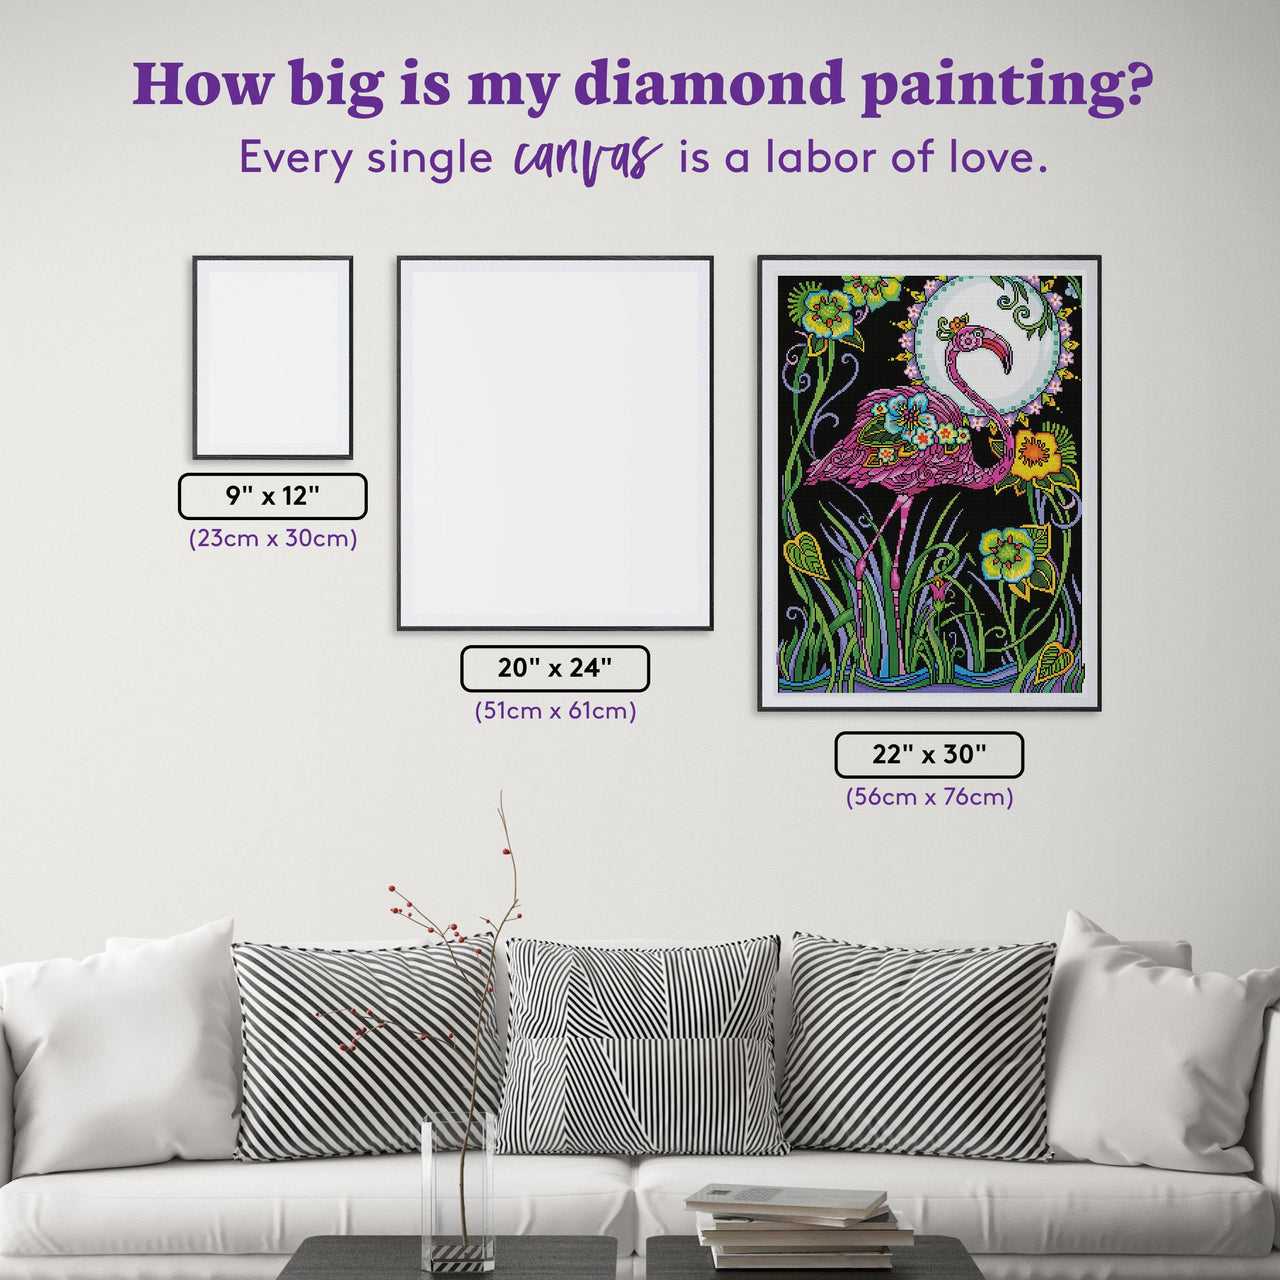 Diamond Painting Flamingo 22" x 30″ (56cm x 76cm) / Square with 39 Colors including 2 ABs / 66735